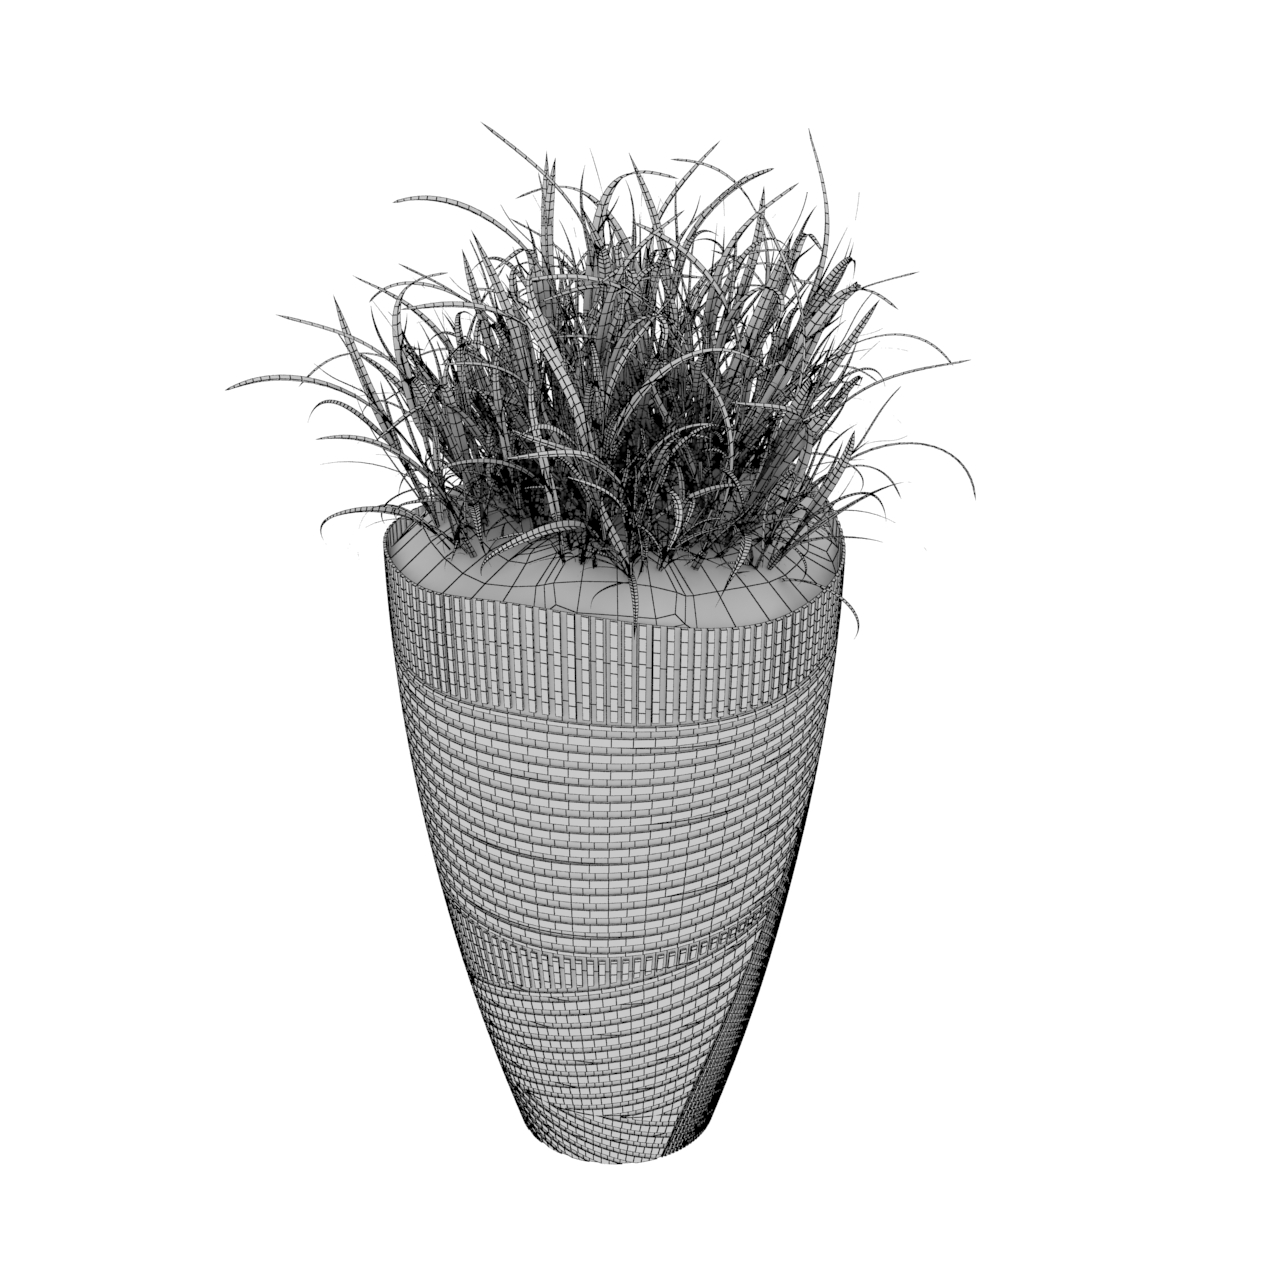 potted greenery grass 3d model